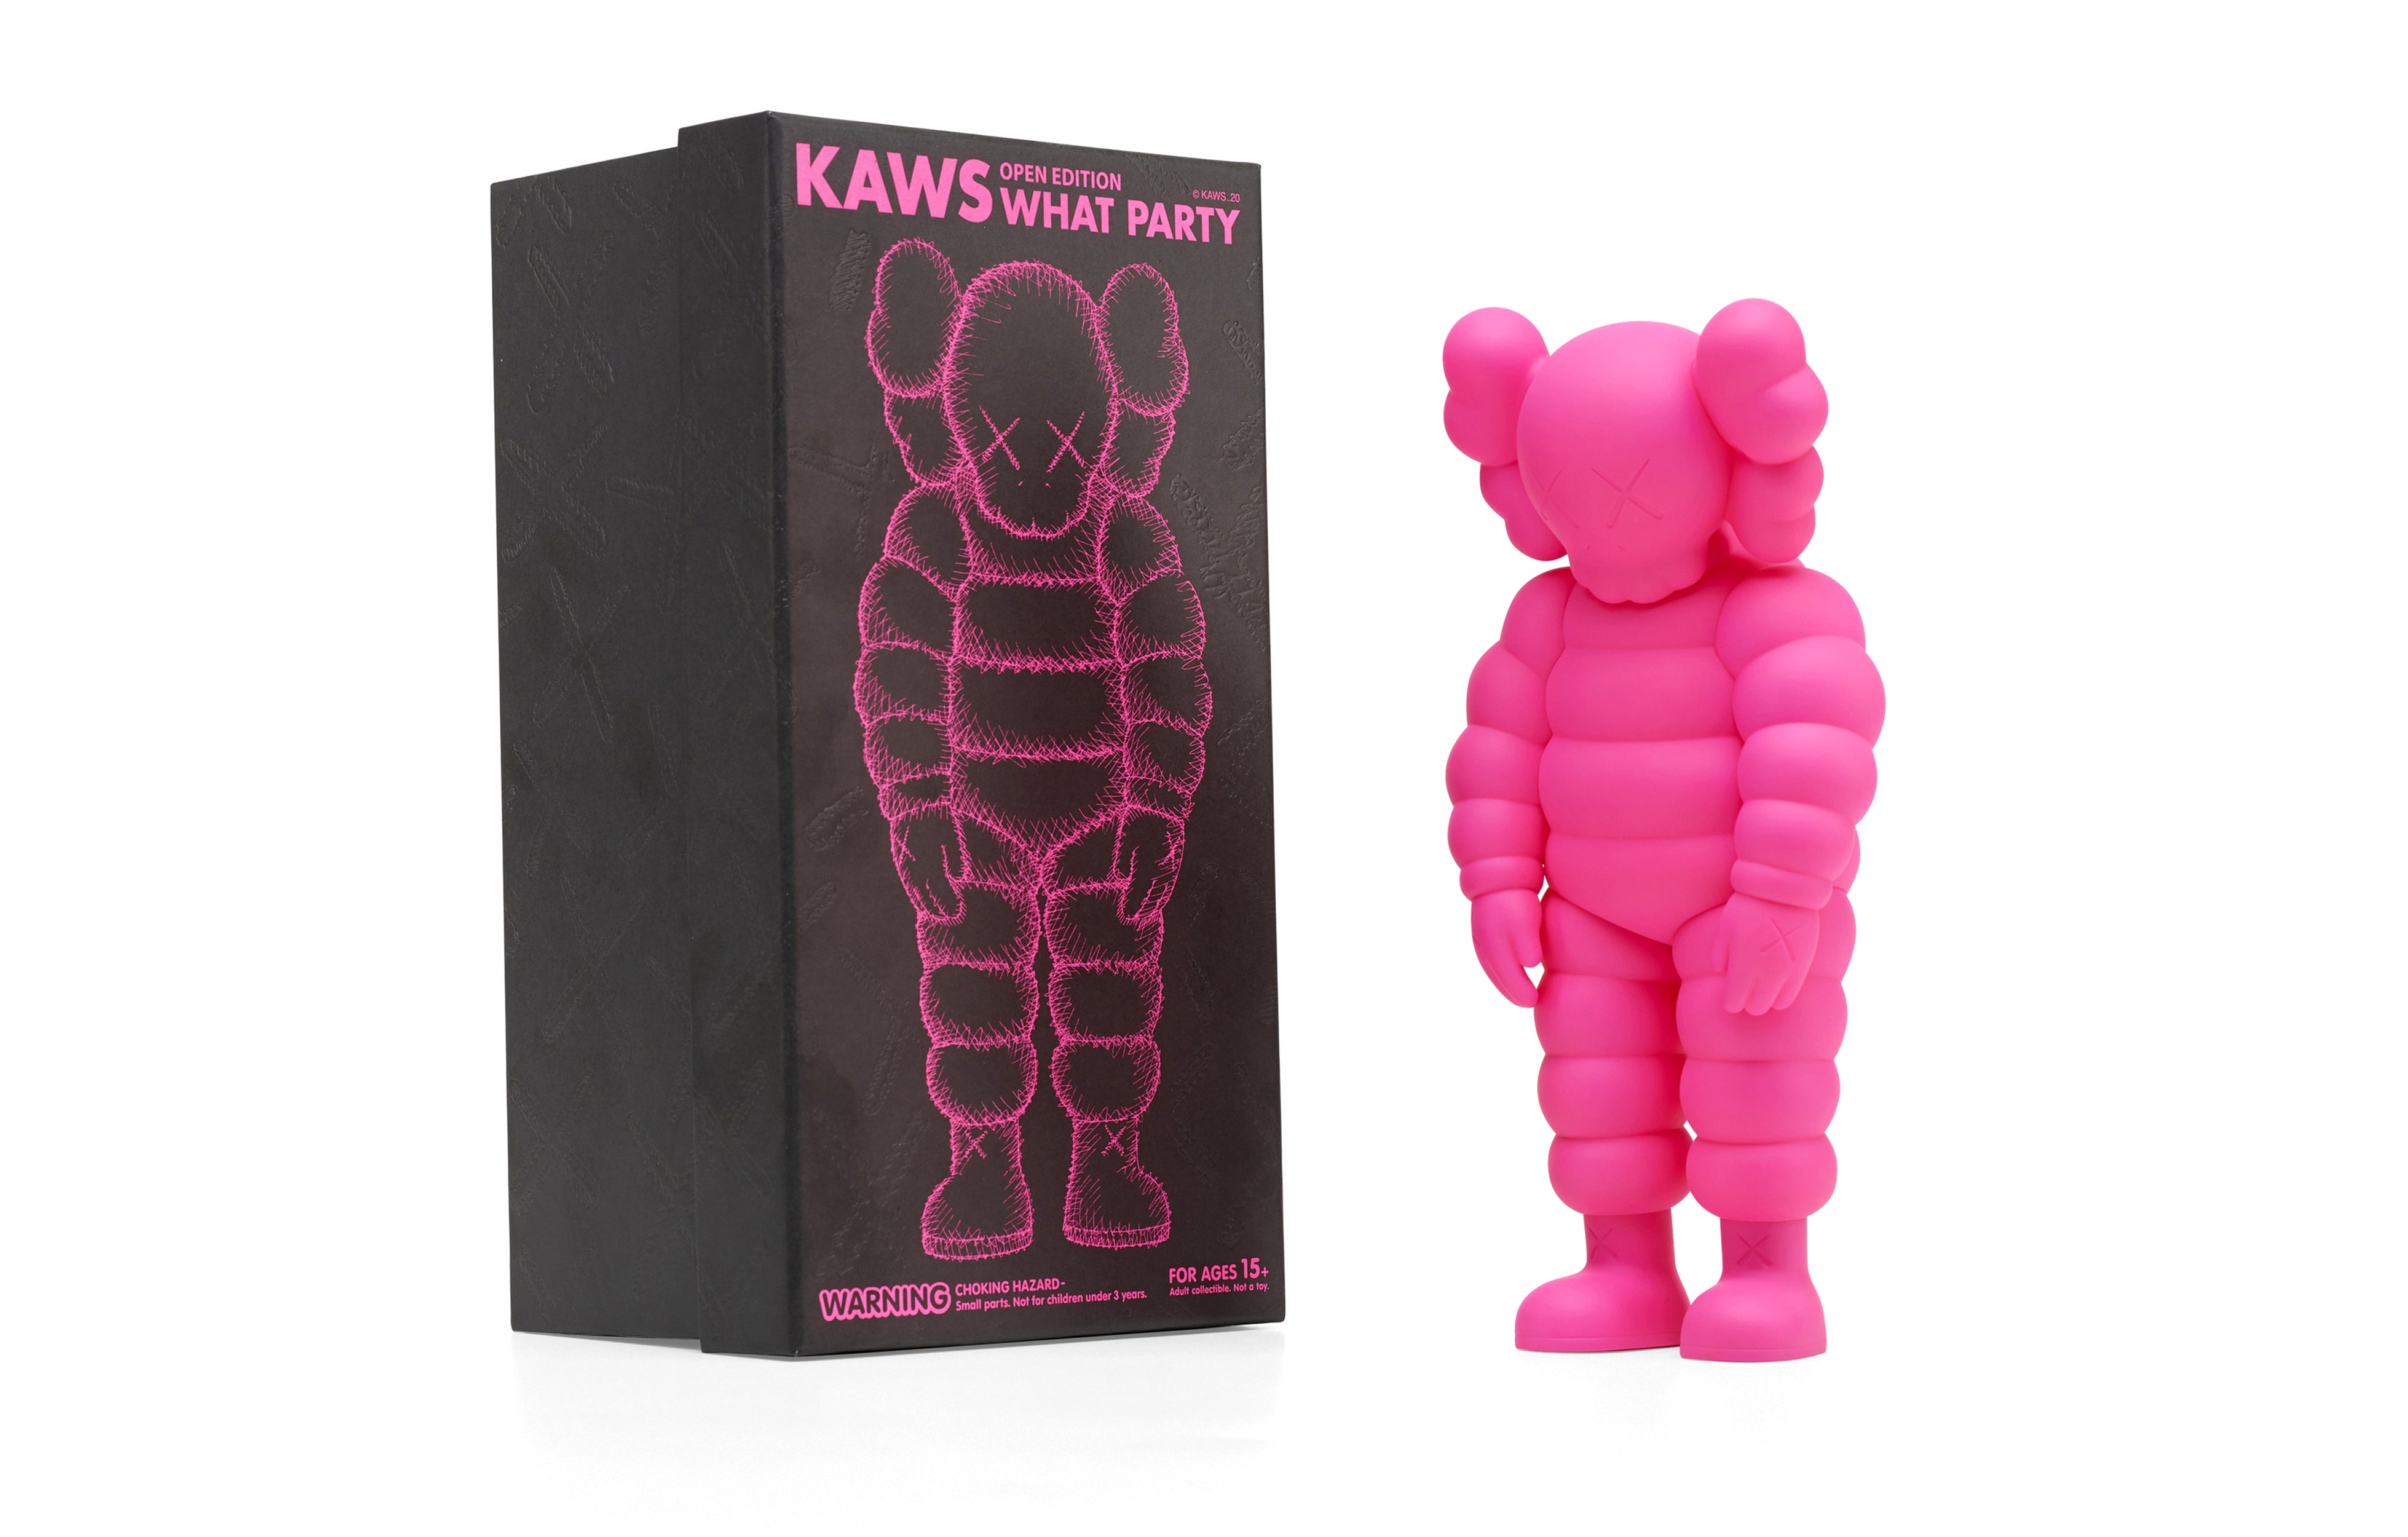 What Party [Pink] by KAWS - Galerie F